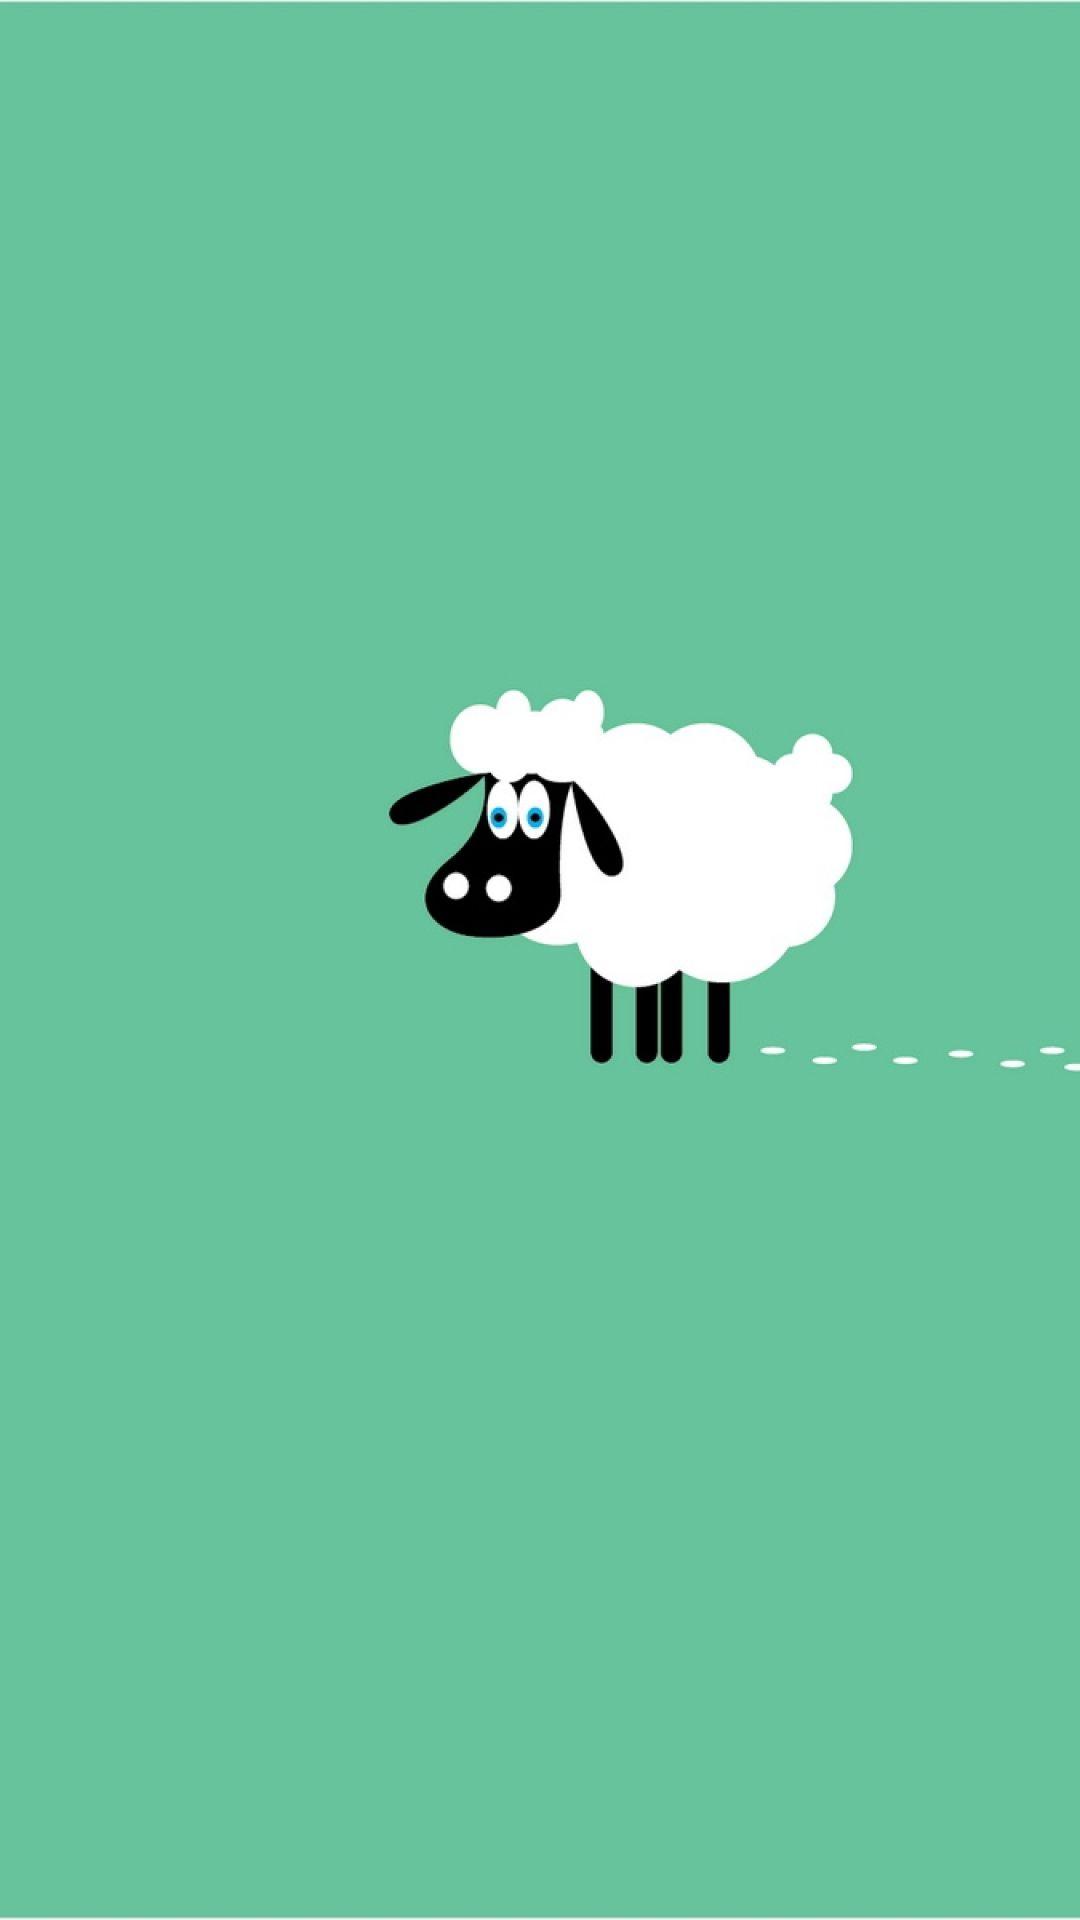 Sheep. 9 Animals Minimalistic Wallpaper for iPhone